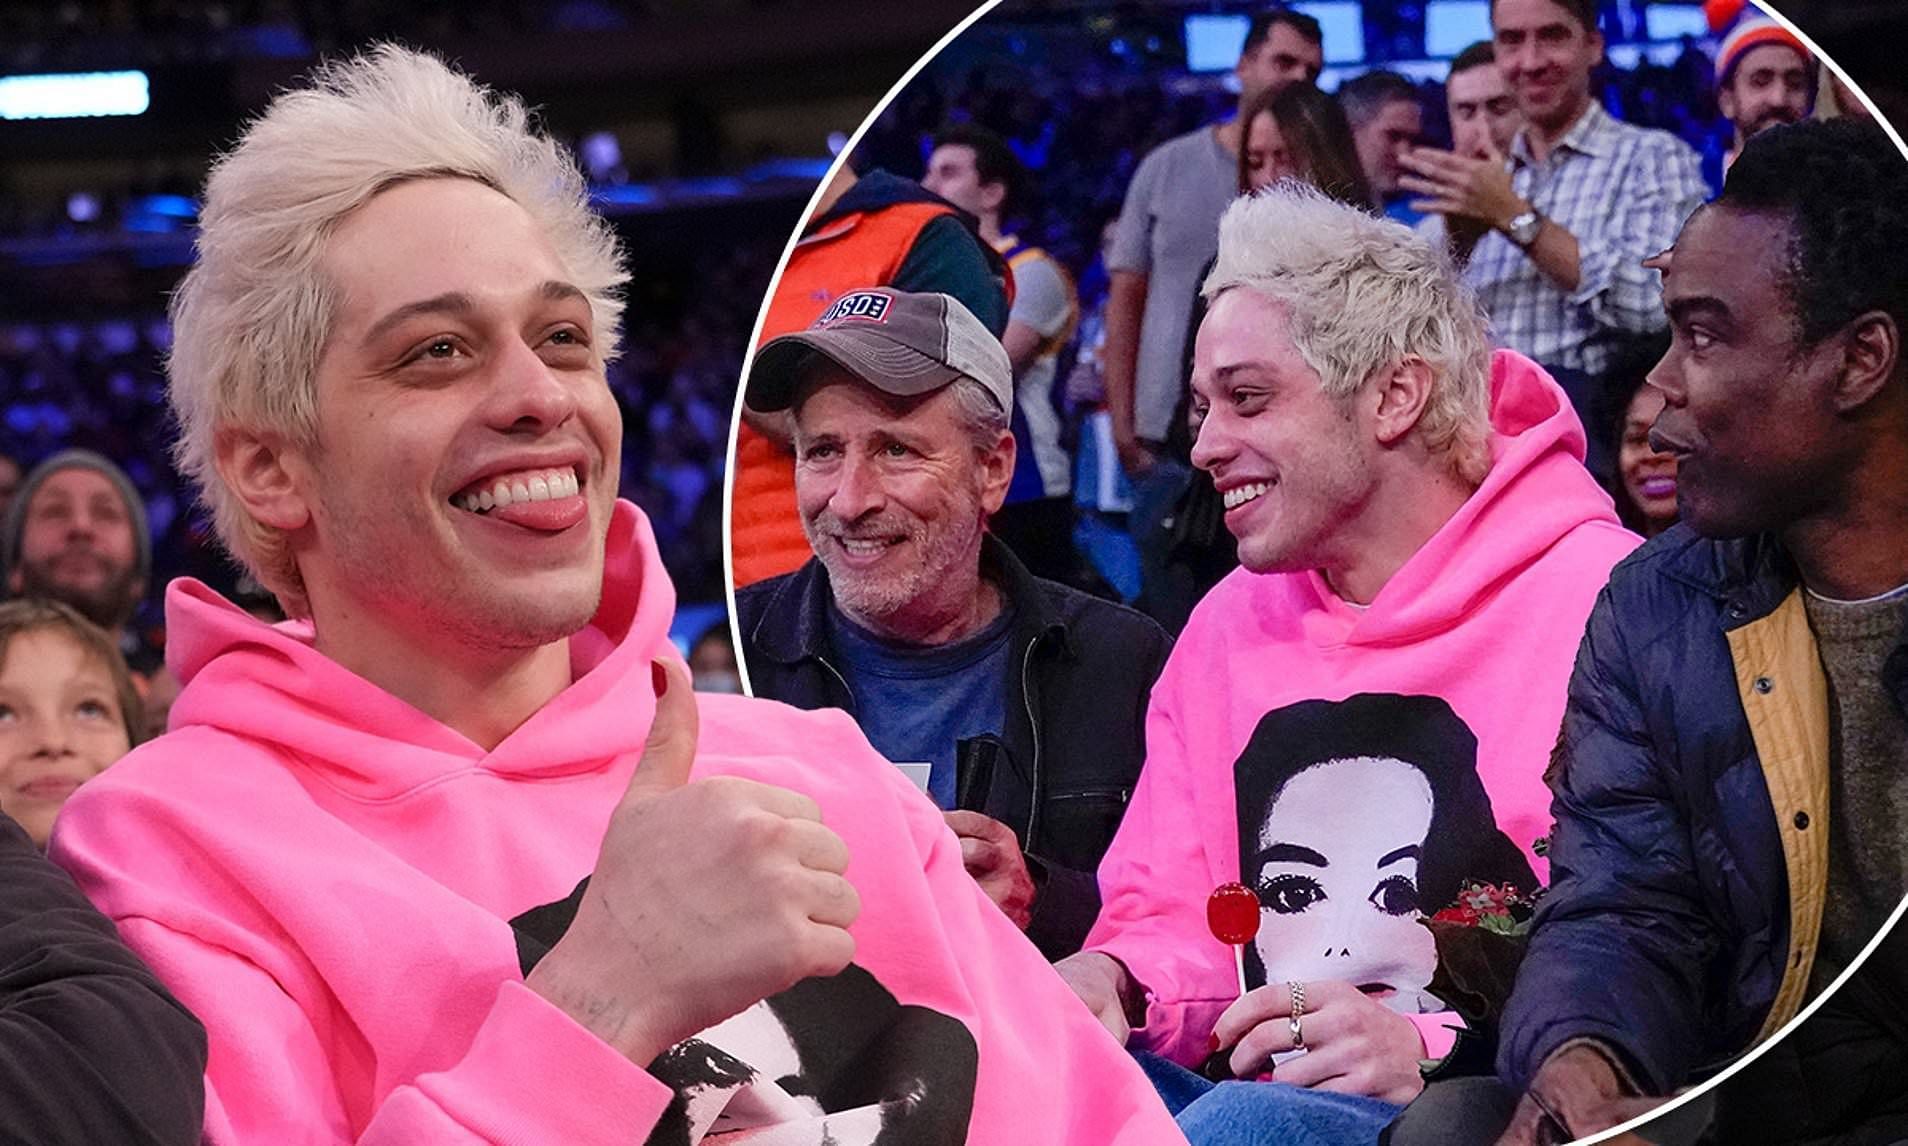 Comedian and actor Pete Davidson attending a New York Knicks home game